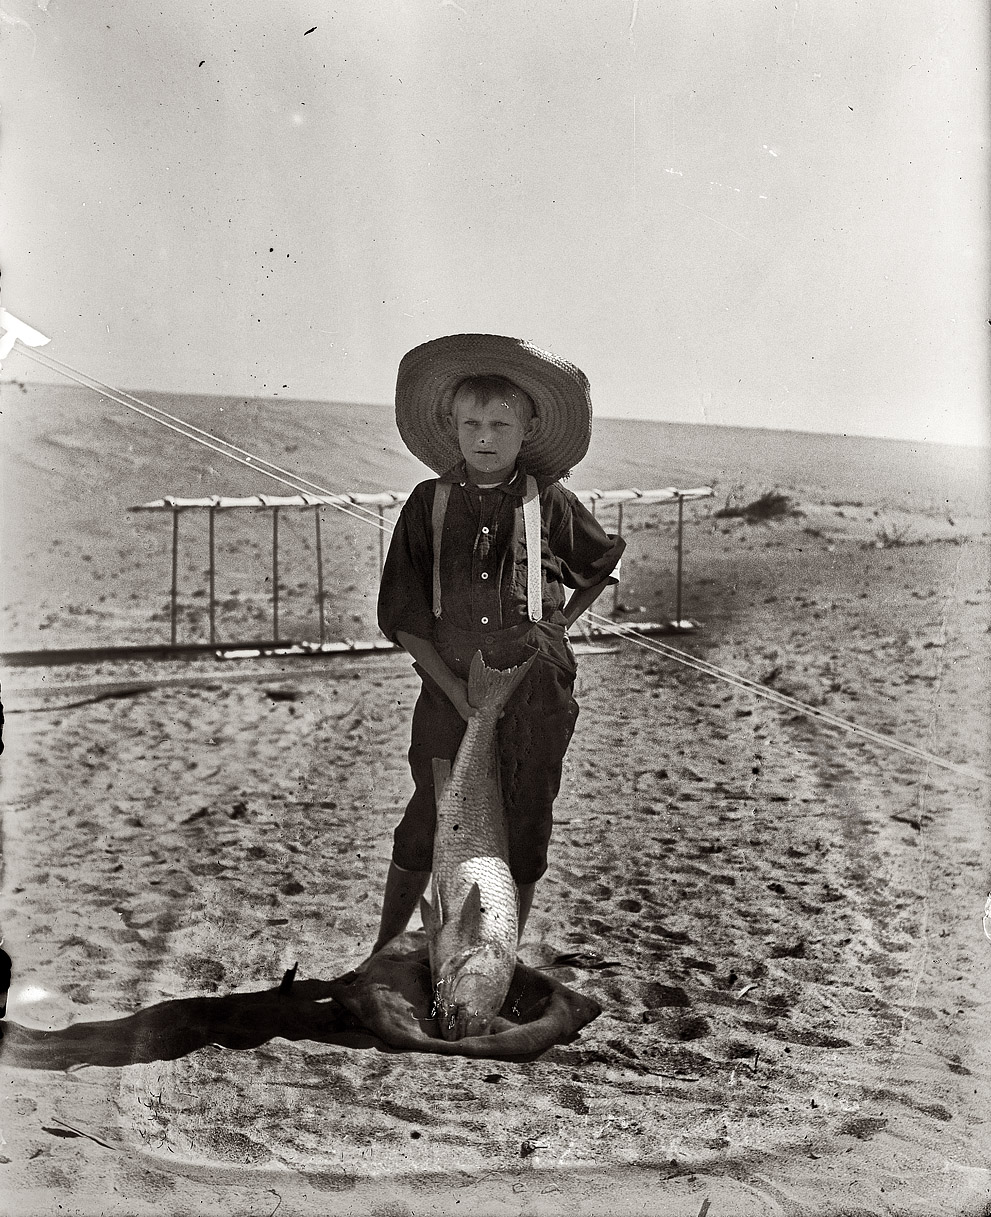 Tom Tate, the son of Captain Tate's half-brother Daniel Tate, poses with a drum fish in front of a 1900 Wright glider. Photograph by either Orville or Wilbur Wright, 1900. View full size.